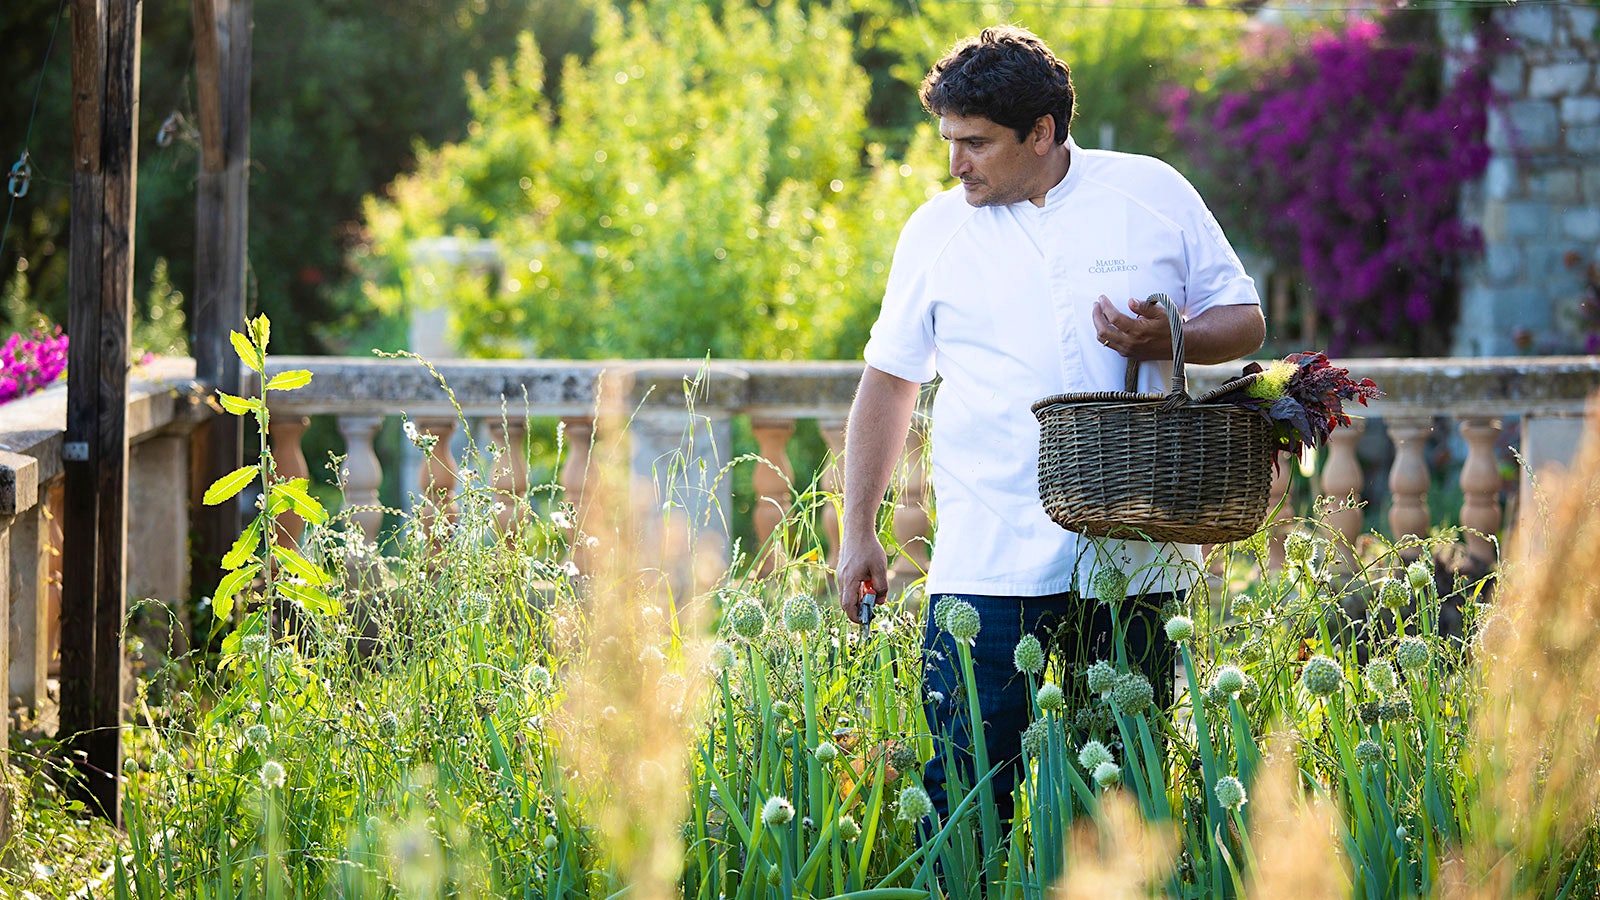  Mirazur chef Mauro Colagreco selecting herbs and greens from a garden